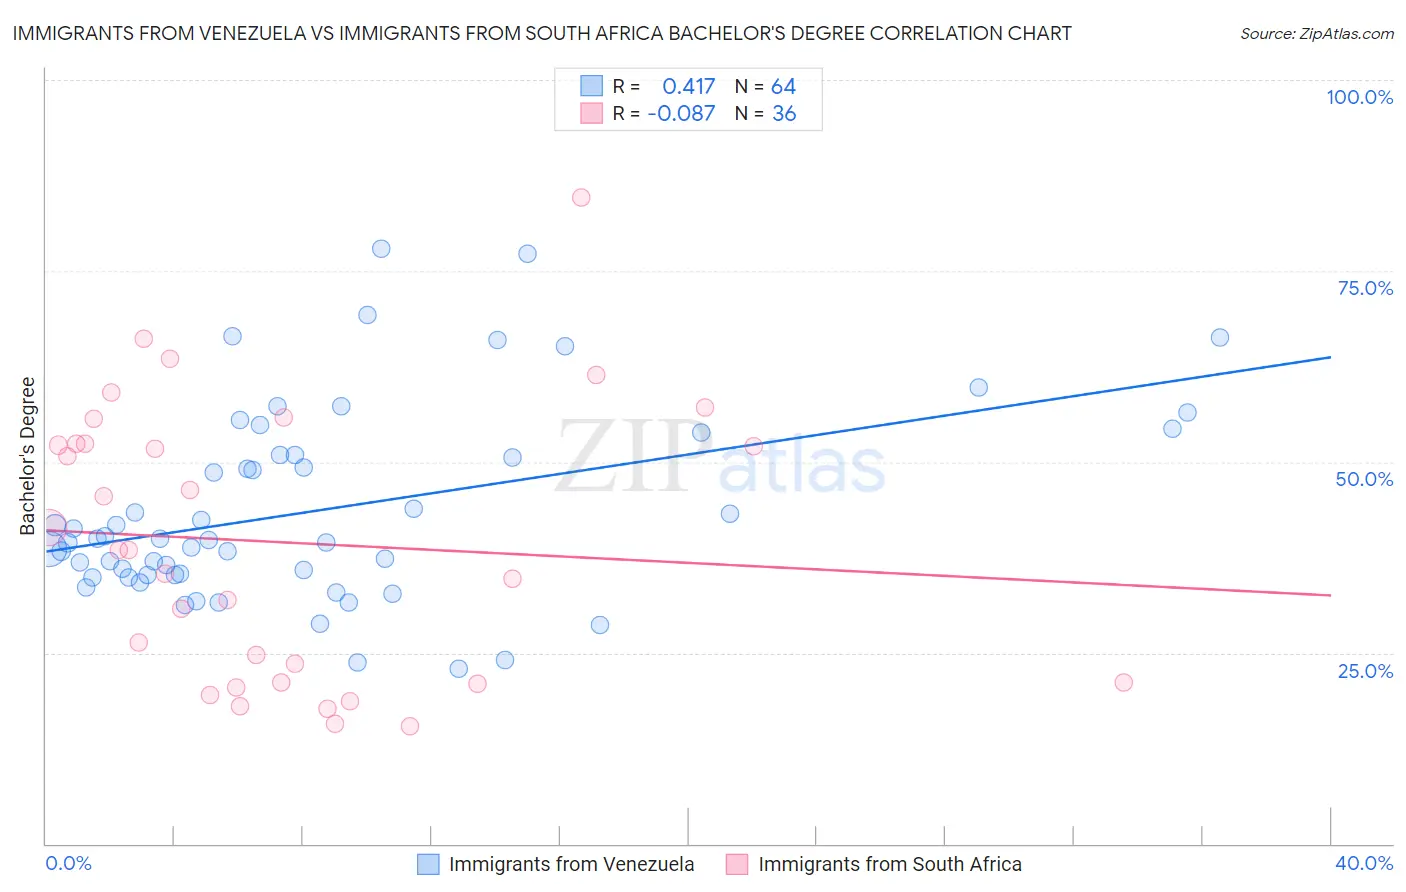 Immigrants from Venezuela vs Immigrants from South Africa Bachelor's Degree